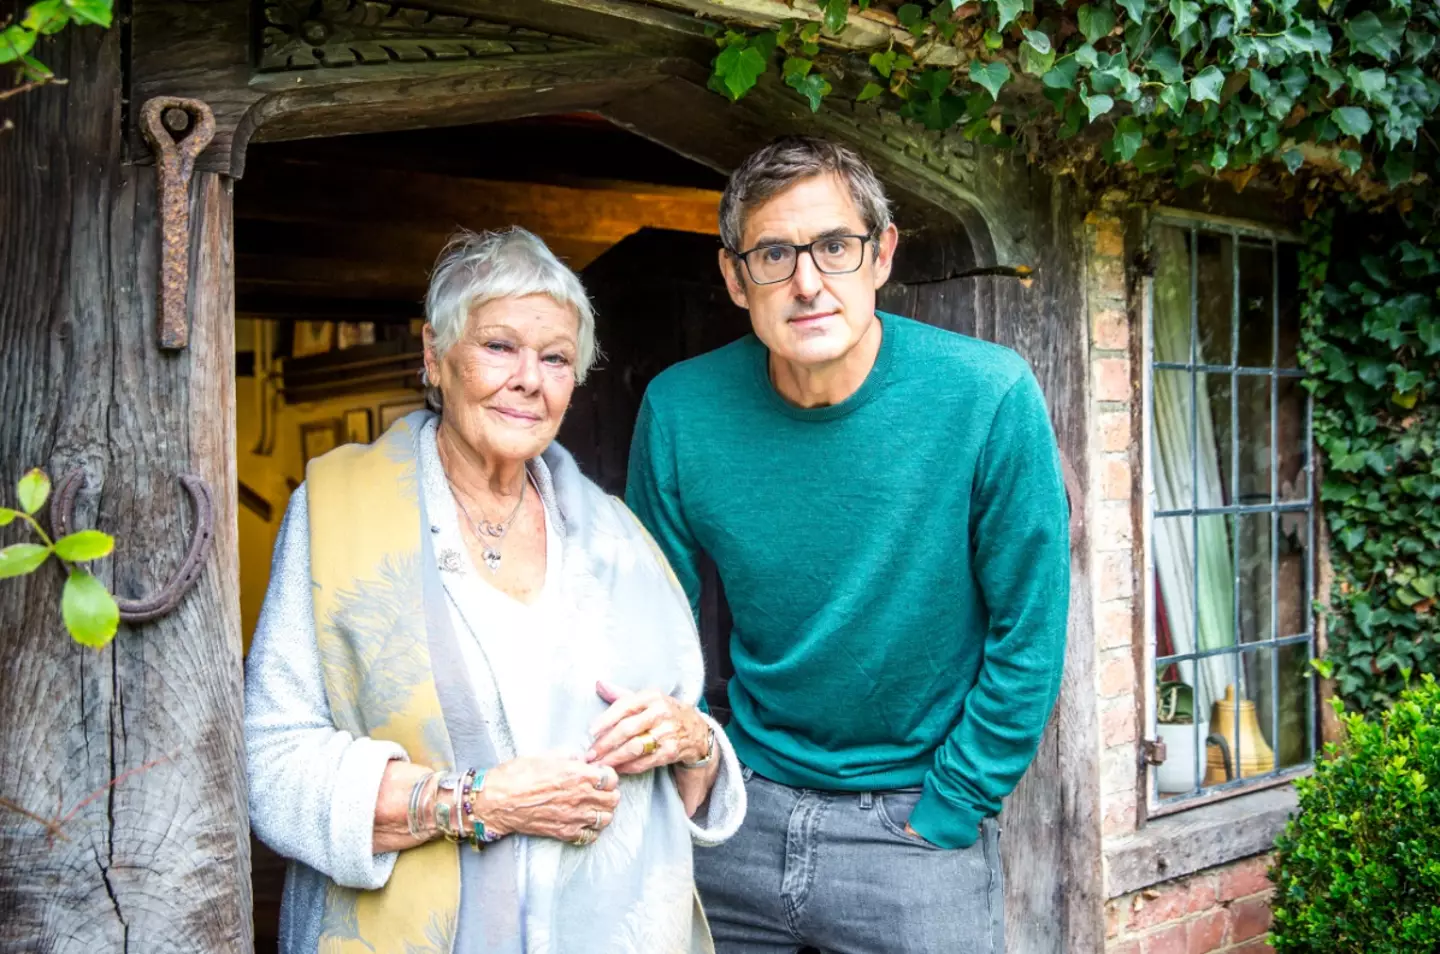 Dench opens up about her eyesight with Theroux.